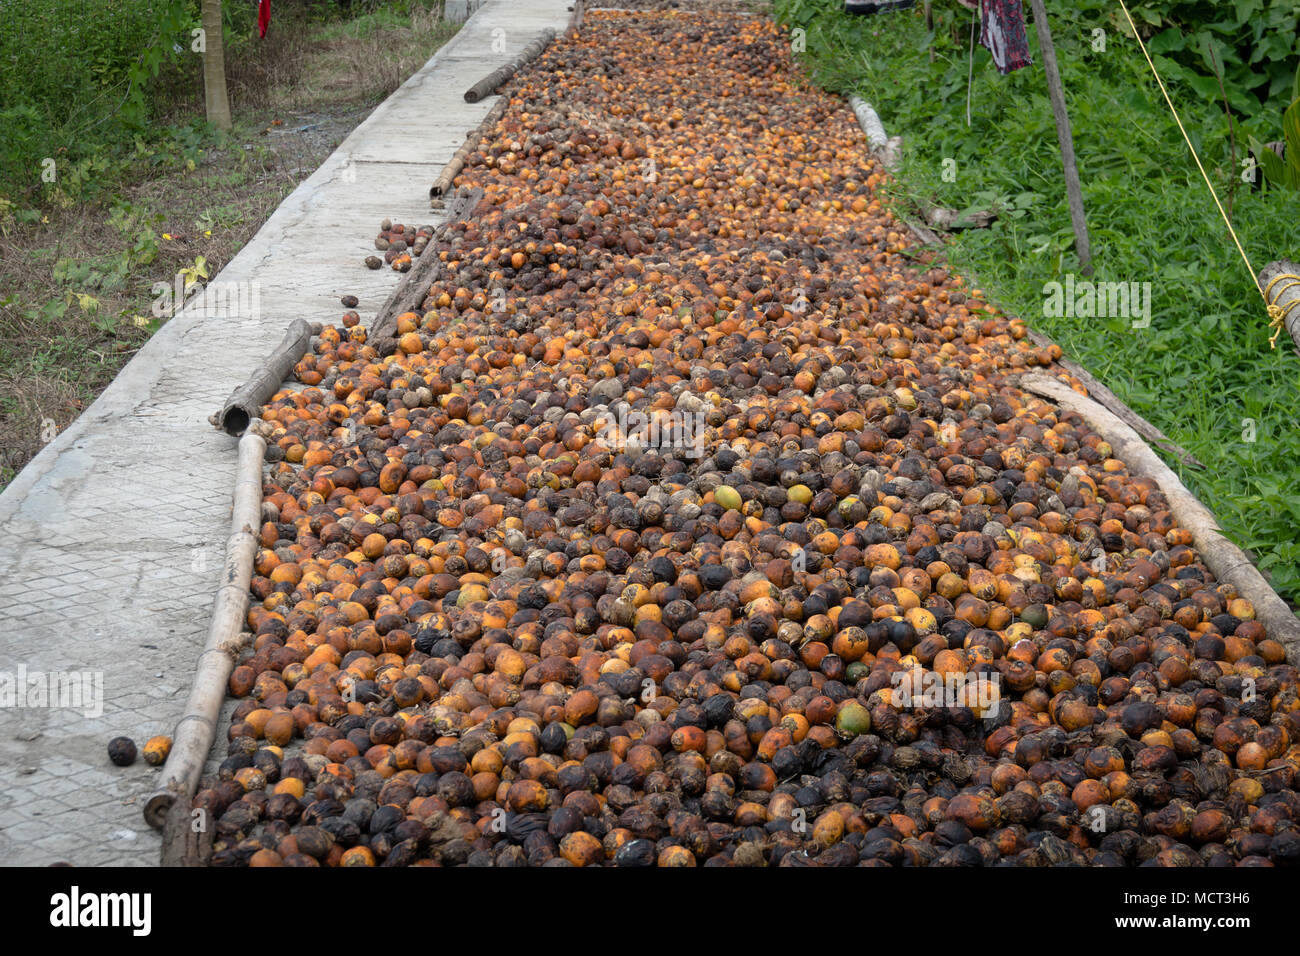 Many raw betel nuts waiting to dry. Top view betel nut or areca nut drying on the floor in the sun. legal drug in southern Asia Stock Photo